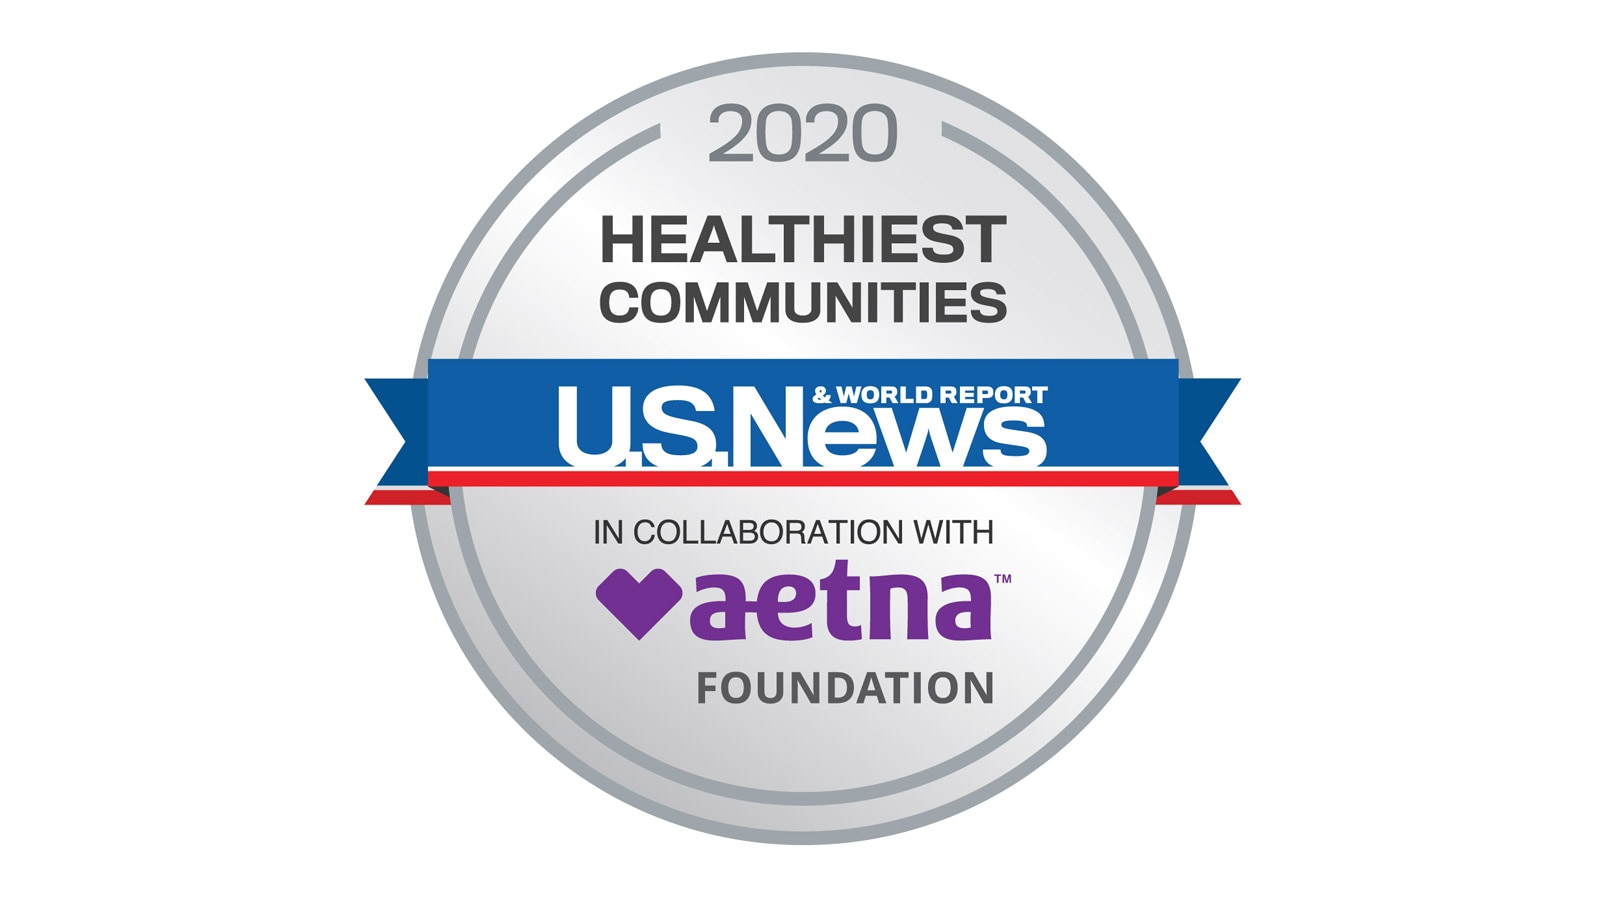 2020 Healthiest Communities by U.S. News & world Report in collaboration with the Aetna Foundation